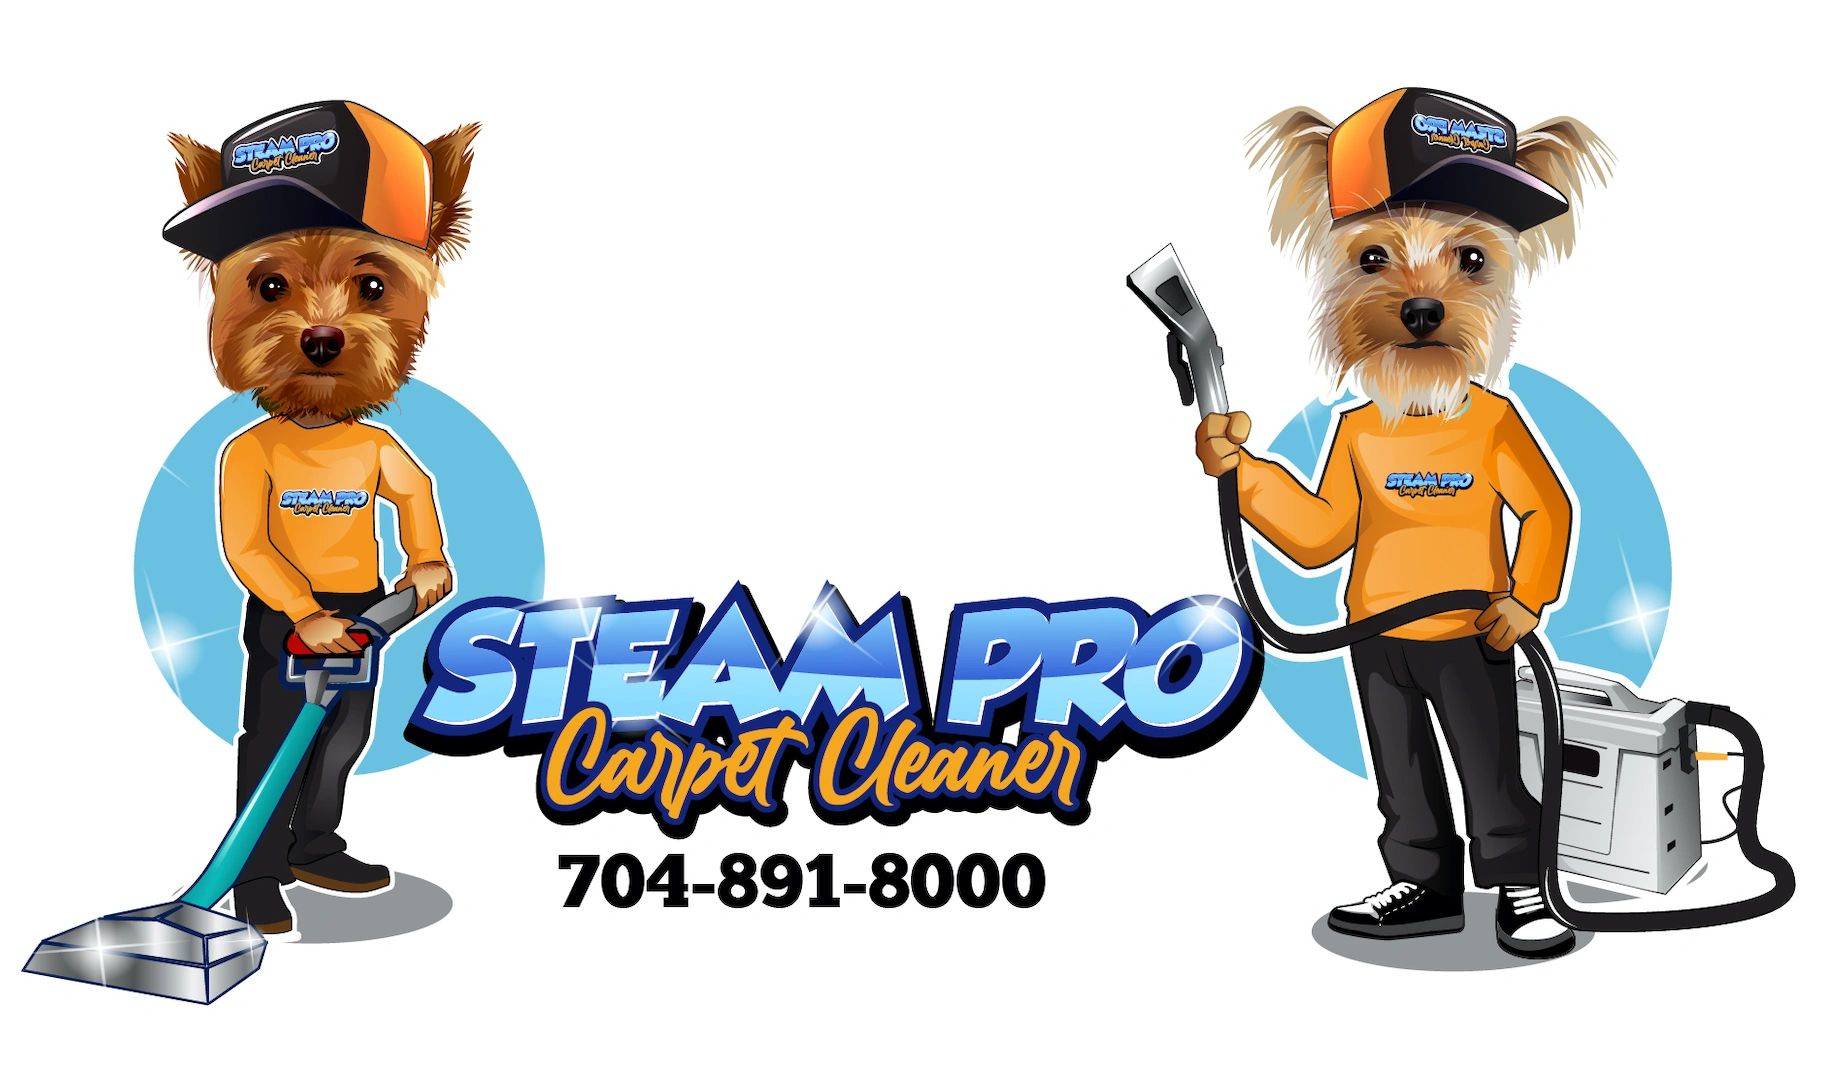 Steam Pro Carpet Cleaner - Carpet Cleaning, Upholstery Cleaning